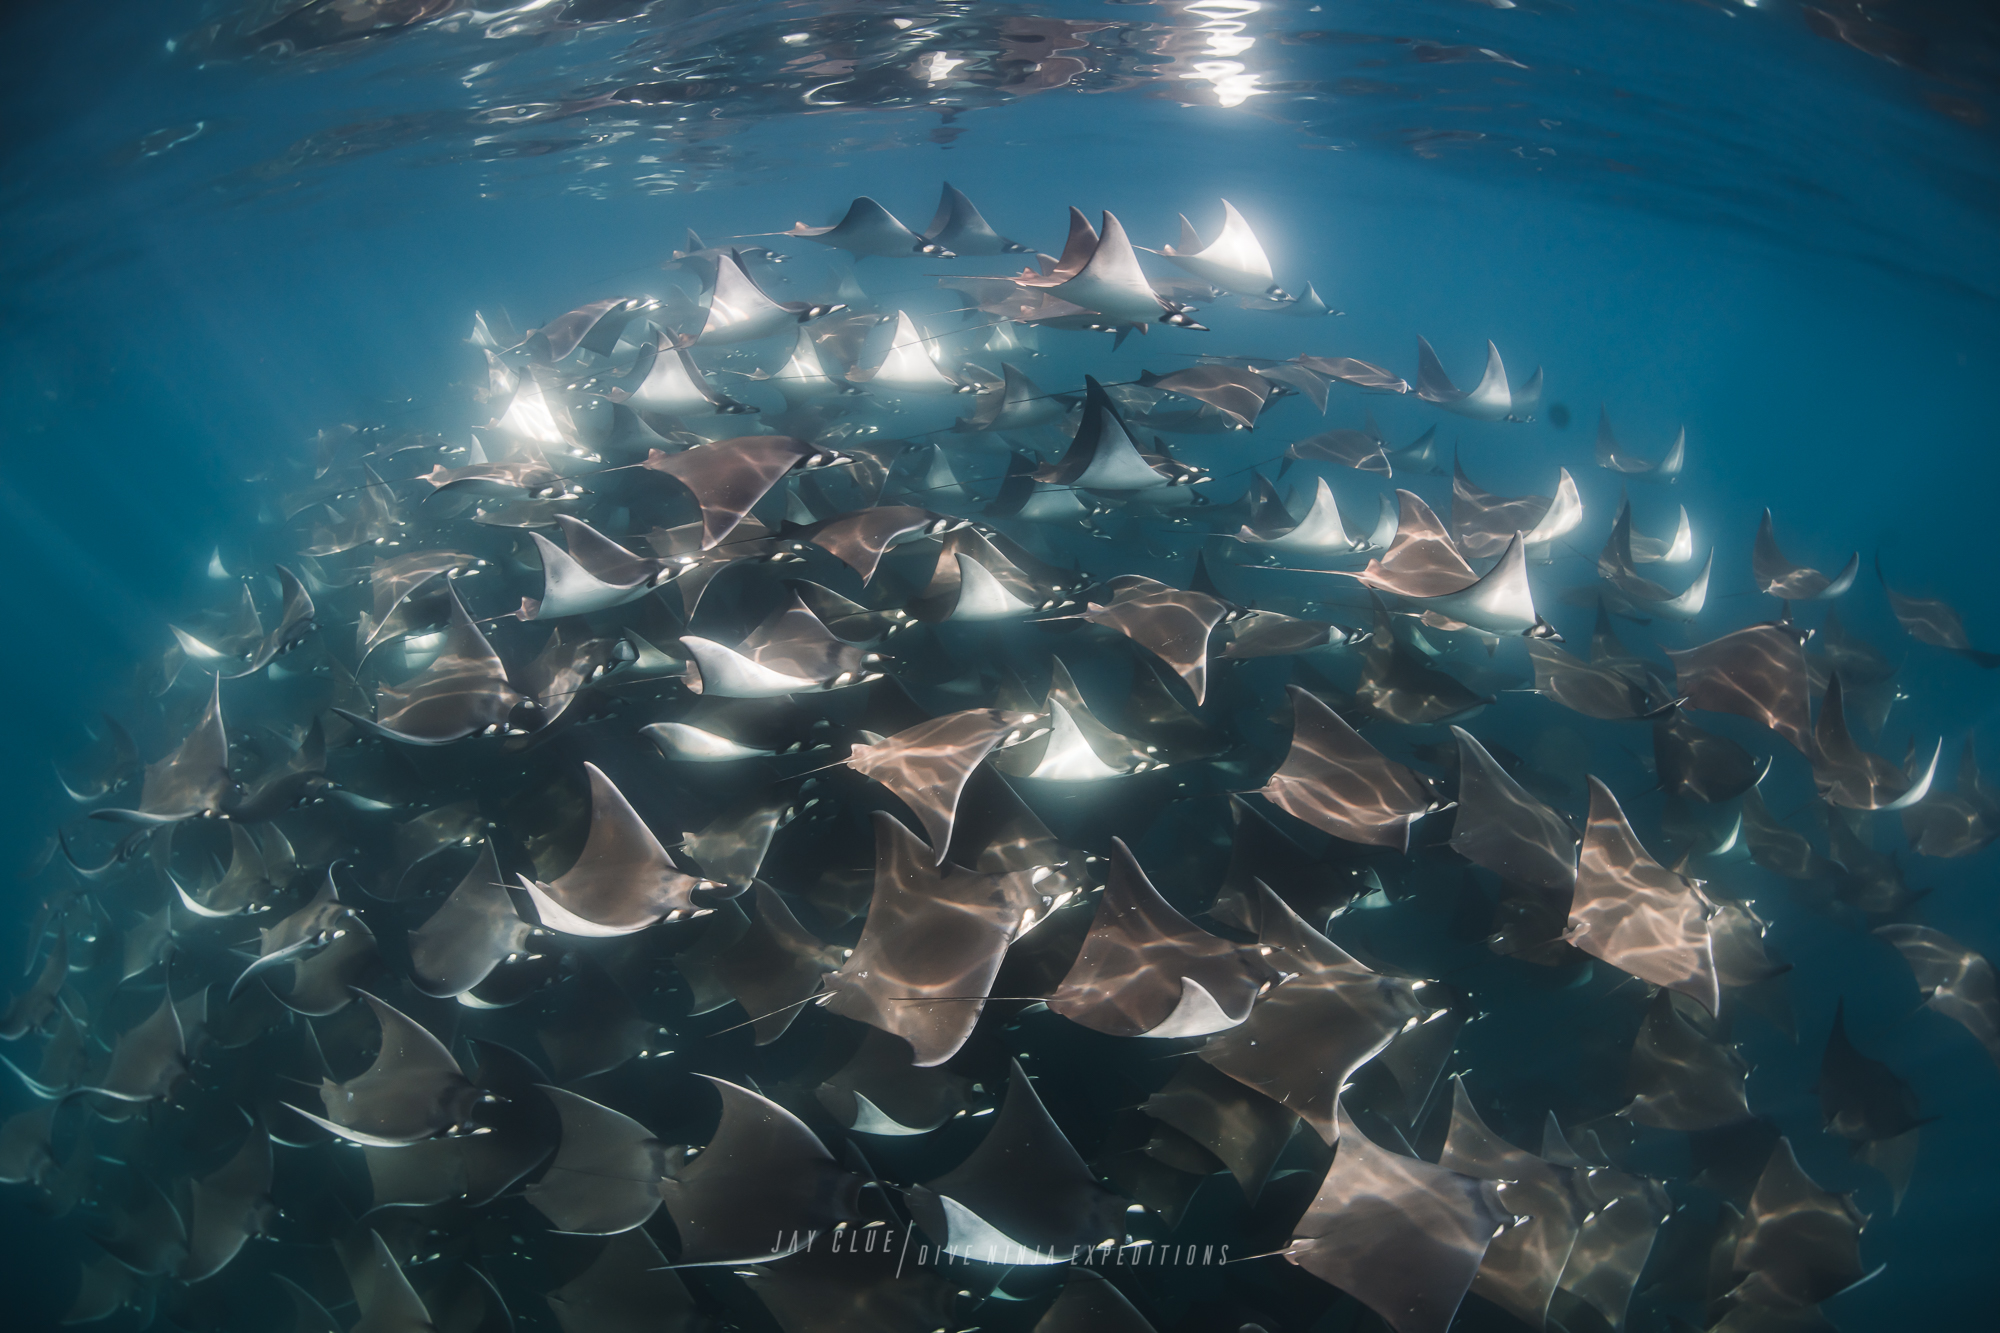 A group of mobula rays swims in the clear waters of the Sea of Cortez off the coast of Baja California